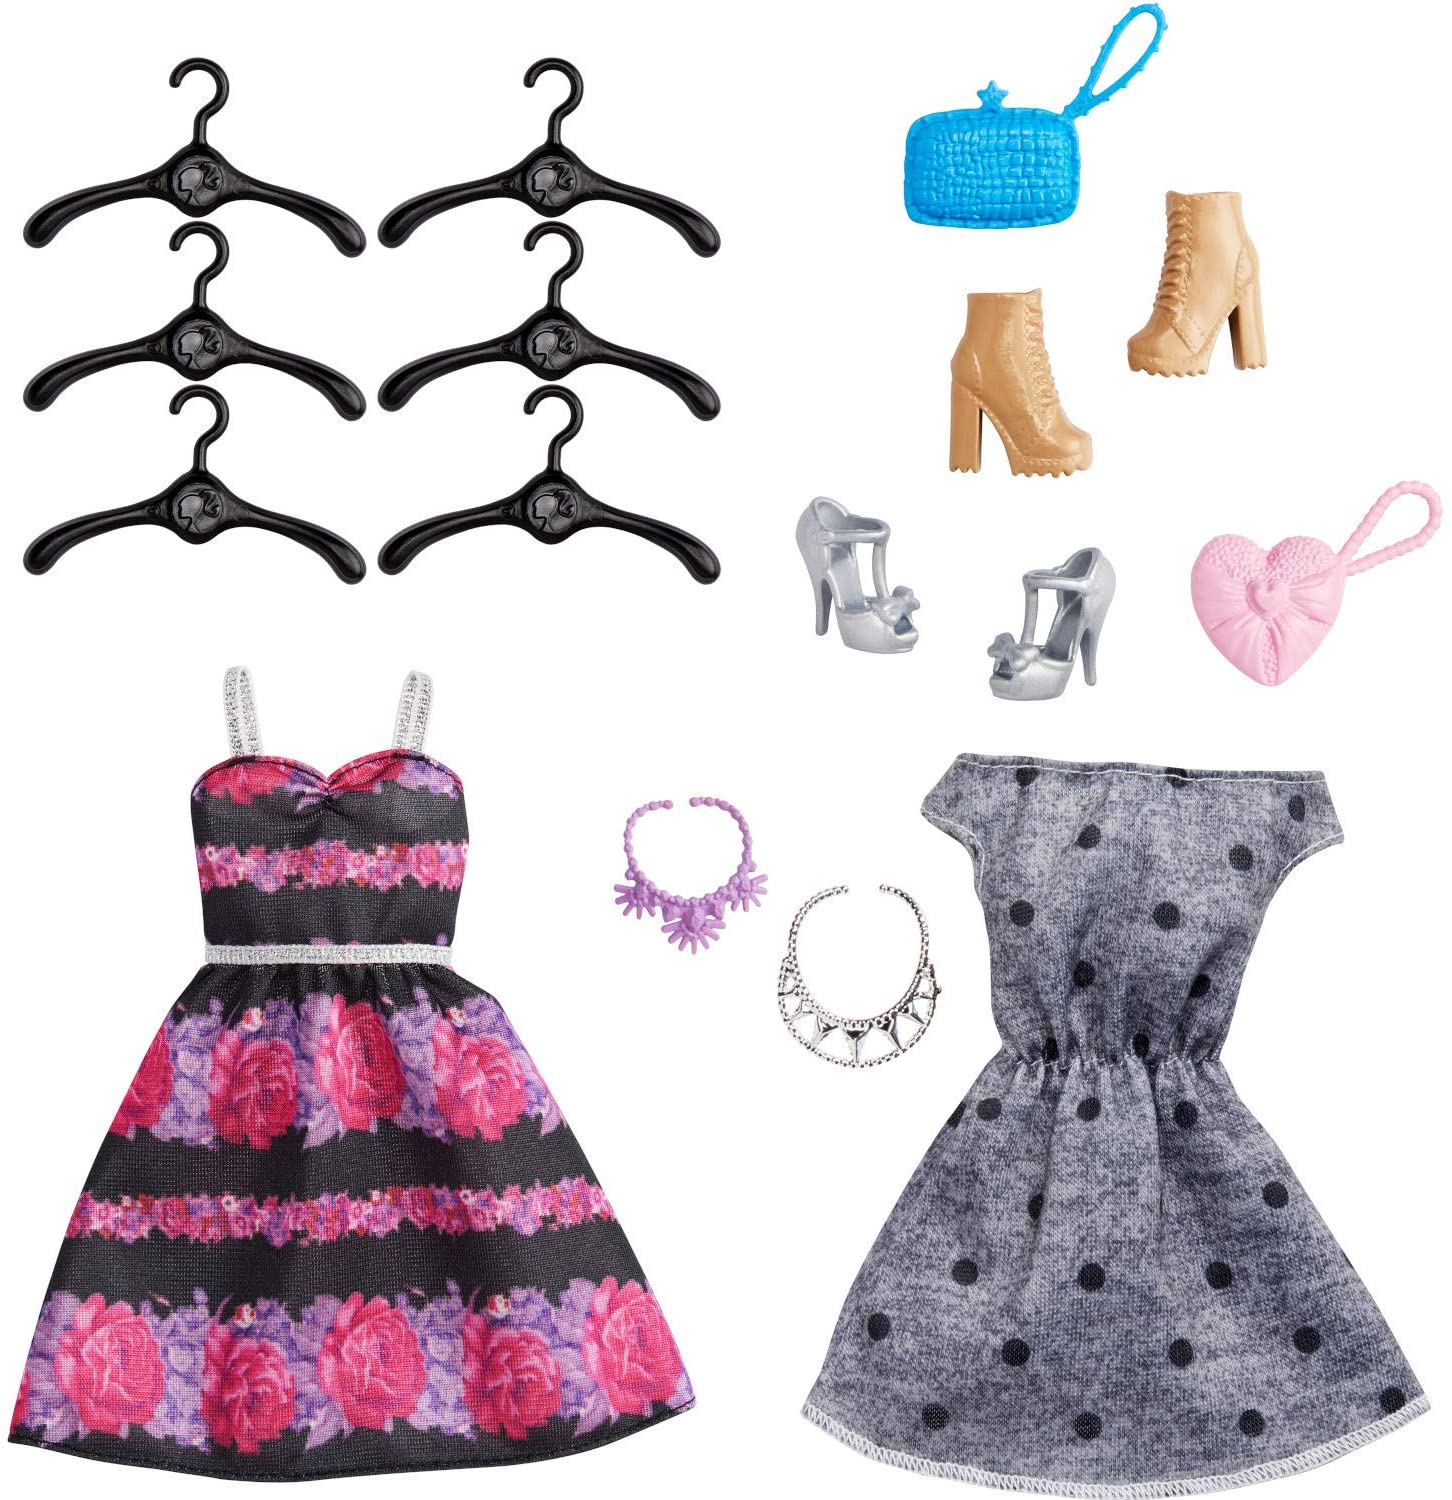 Mattel Barbie Fashionistas Ultimate Closet Doll and Accessory